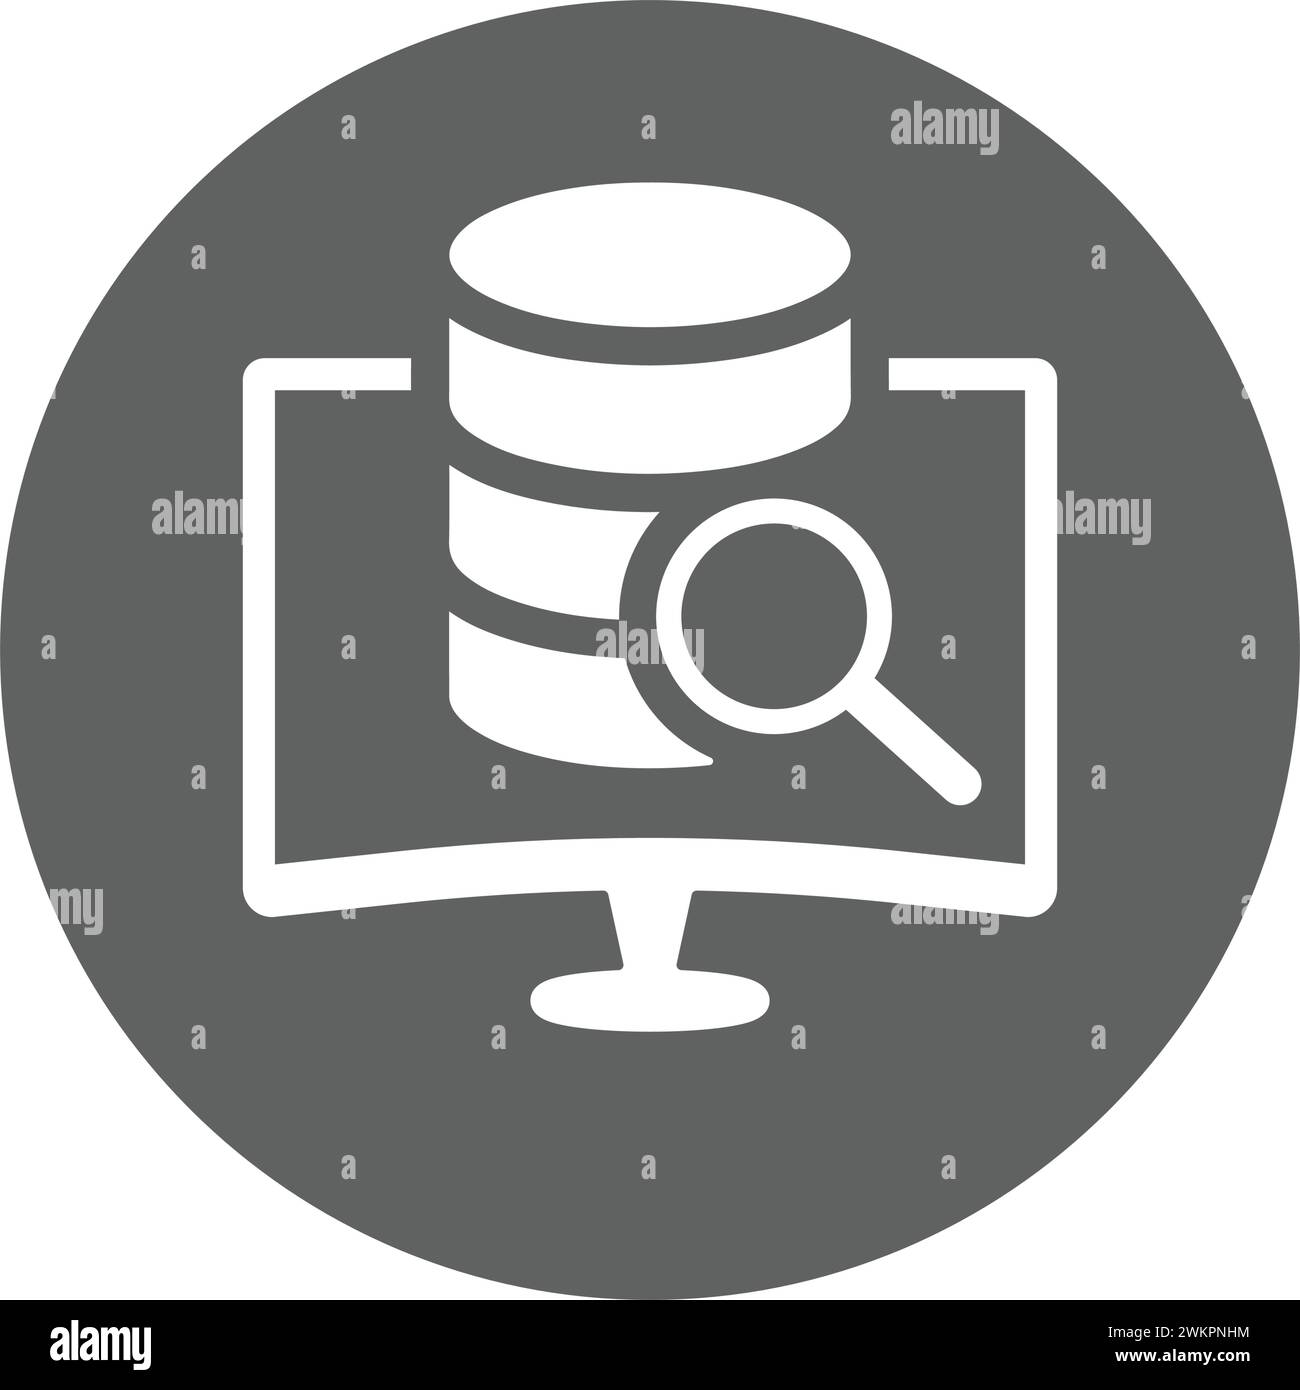 Data, analysis, summary icon. Simple vector illustration for web, print files, graphic or commercial purposes. Stock Vector